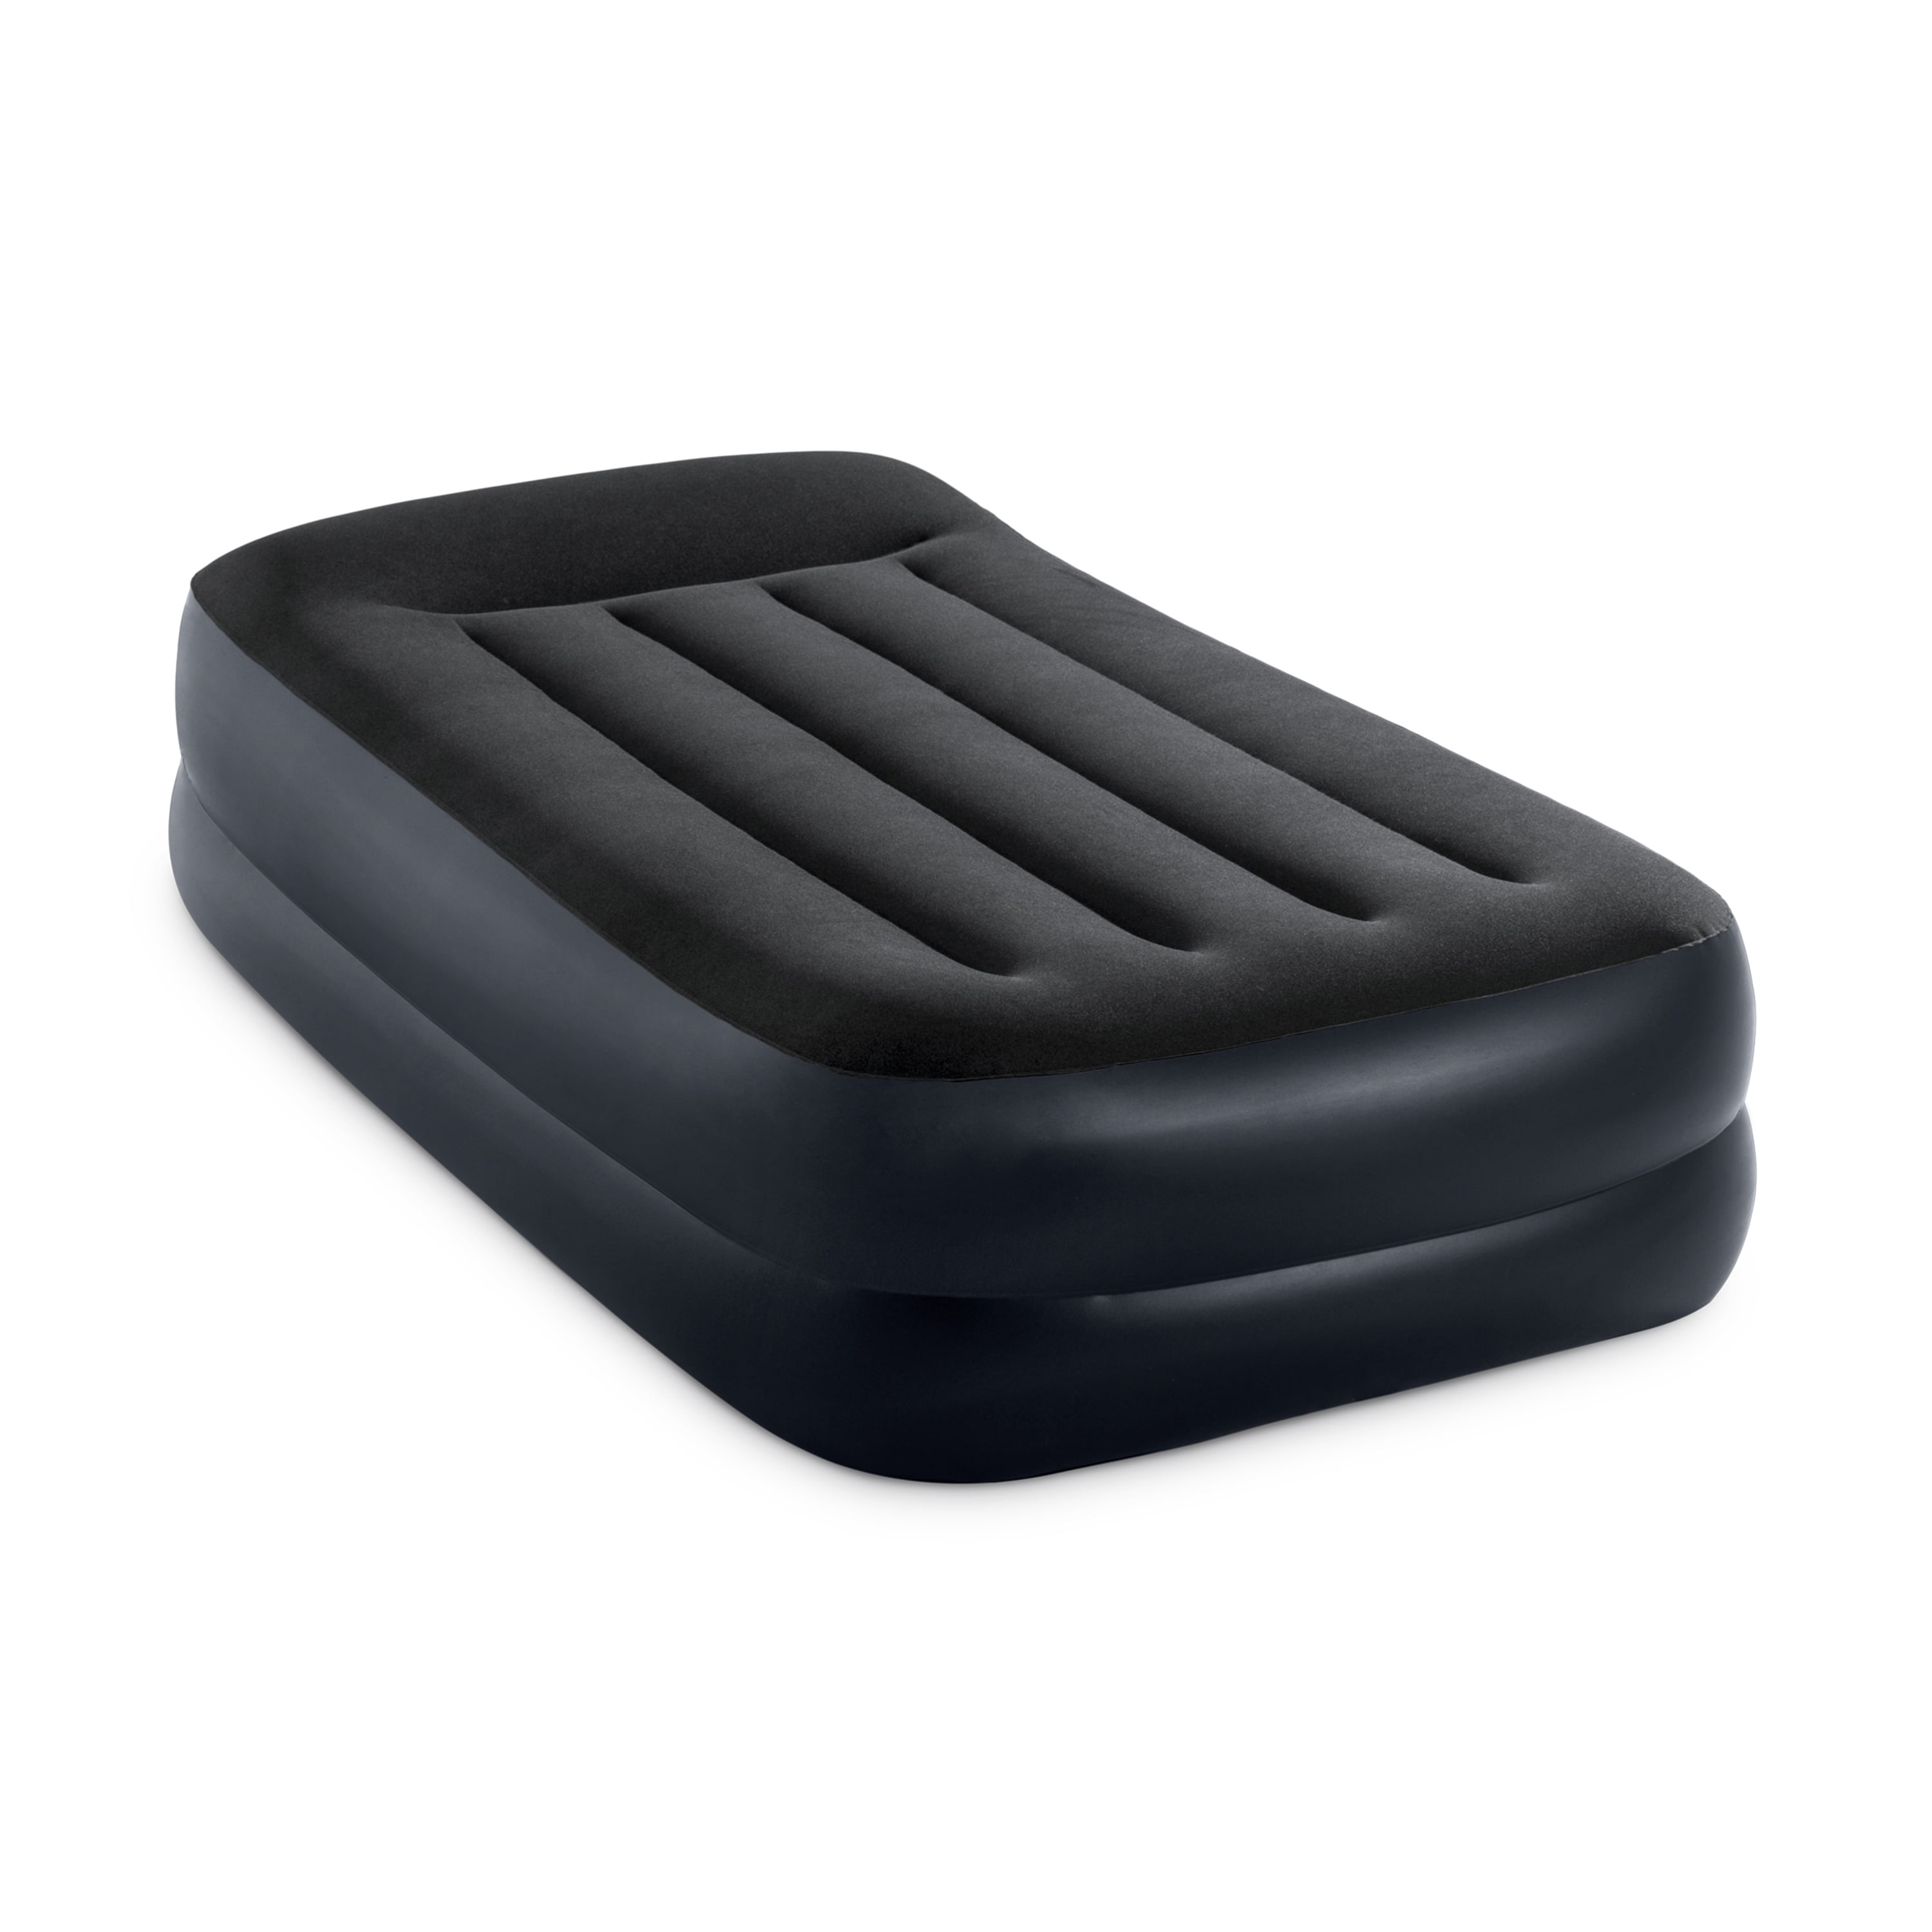 Intex - Pillow Rest Raised Airbed, Twin - 1